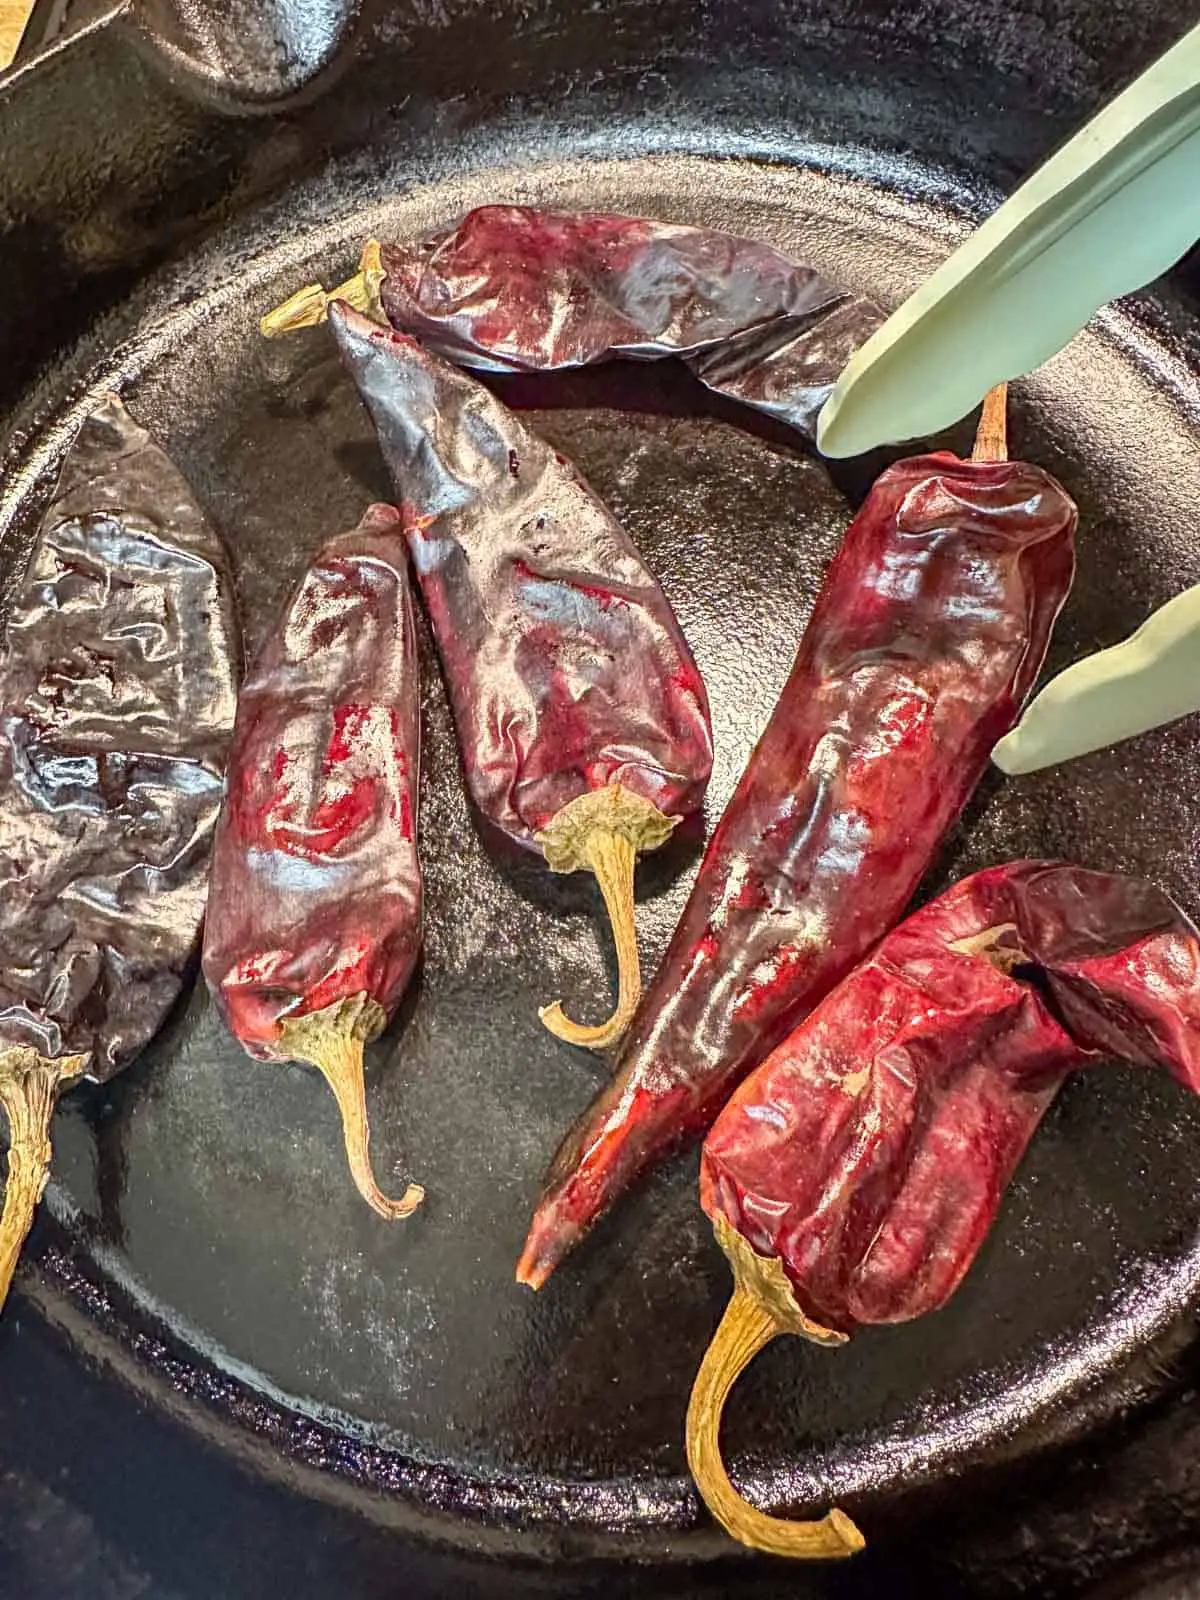 New Mexico red chile pods toasting in a cast iron pan. There is a set of tongs poised over one of the chile pods.